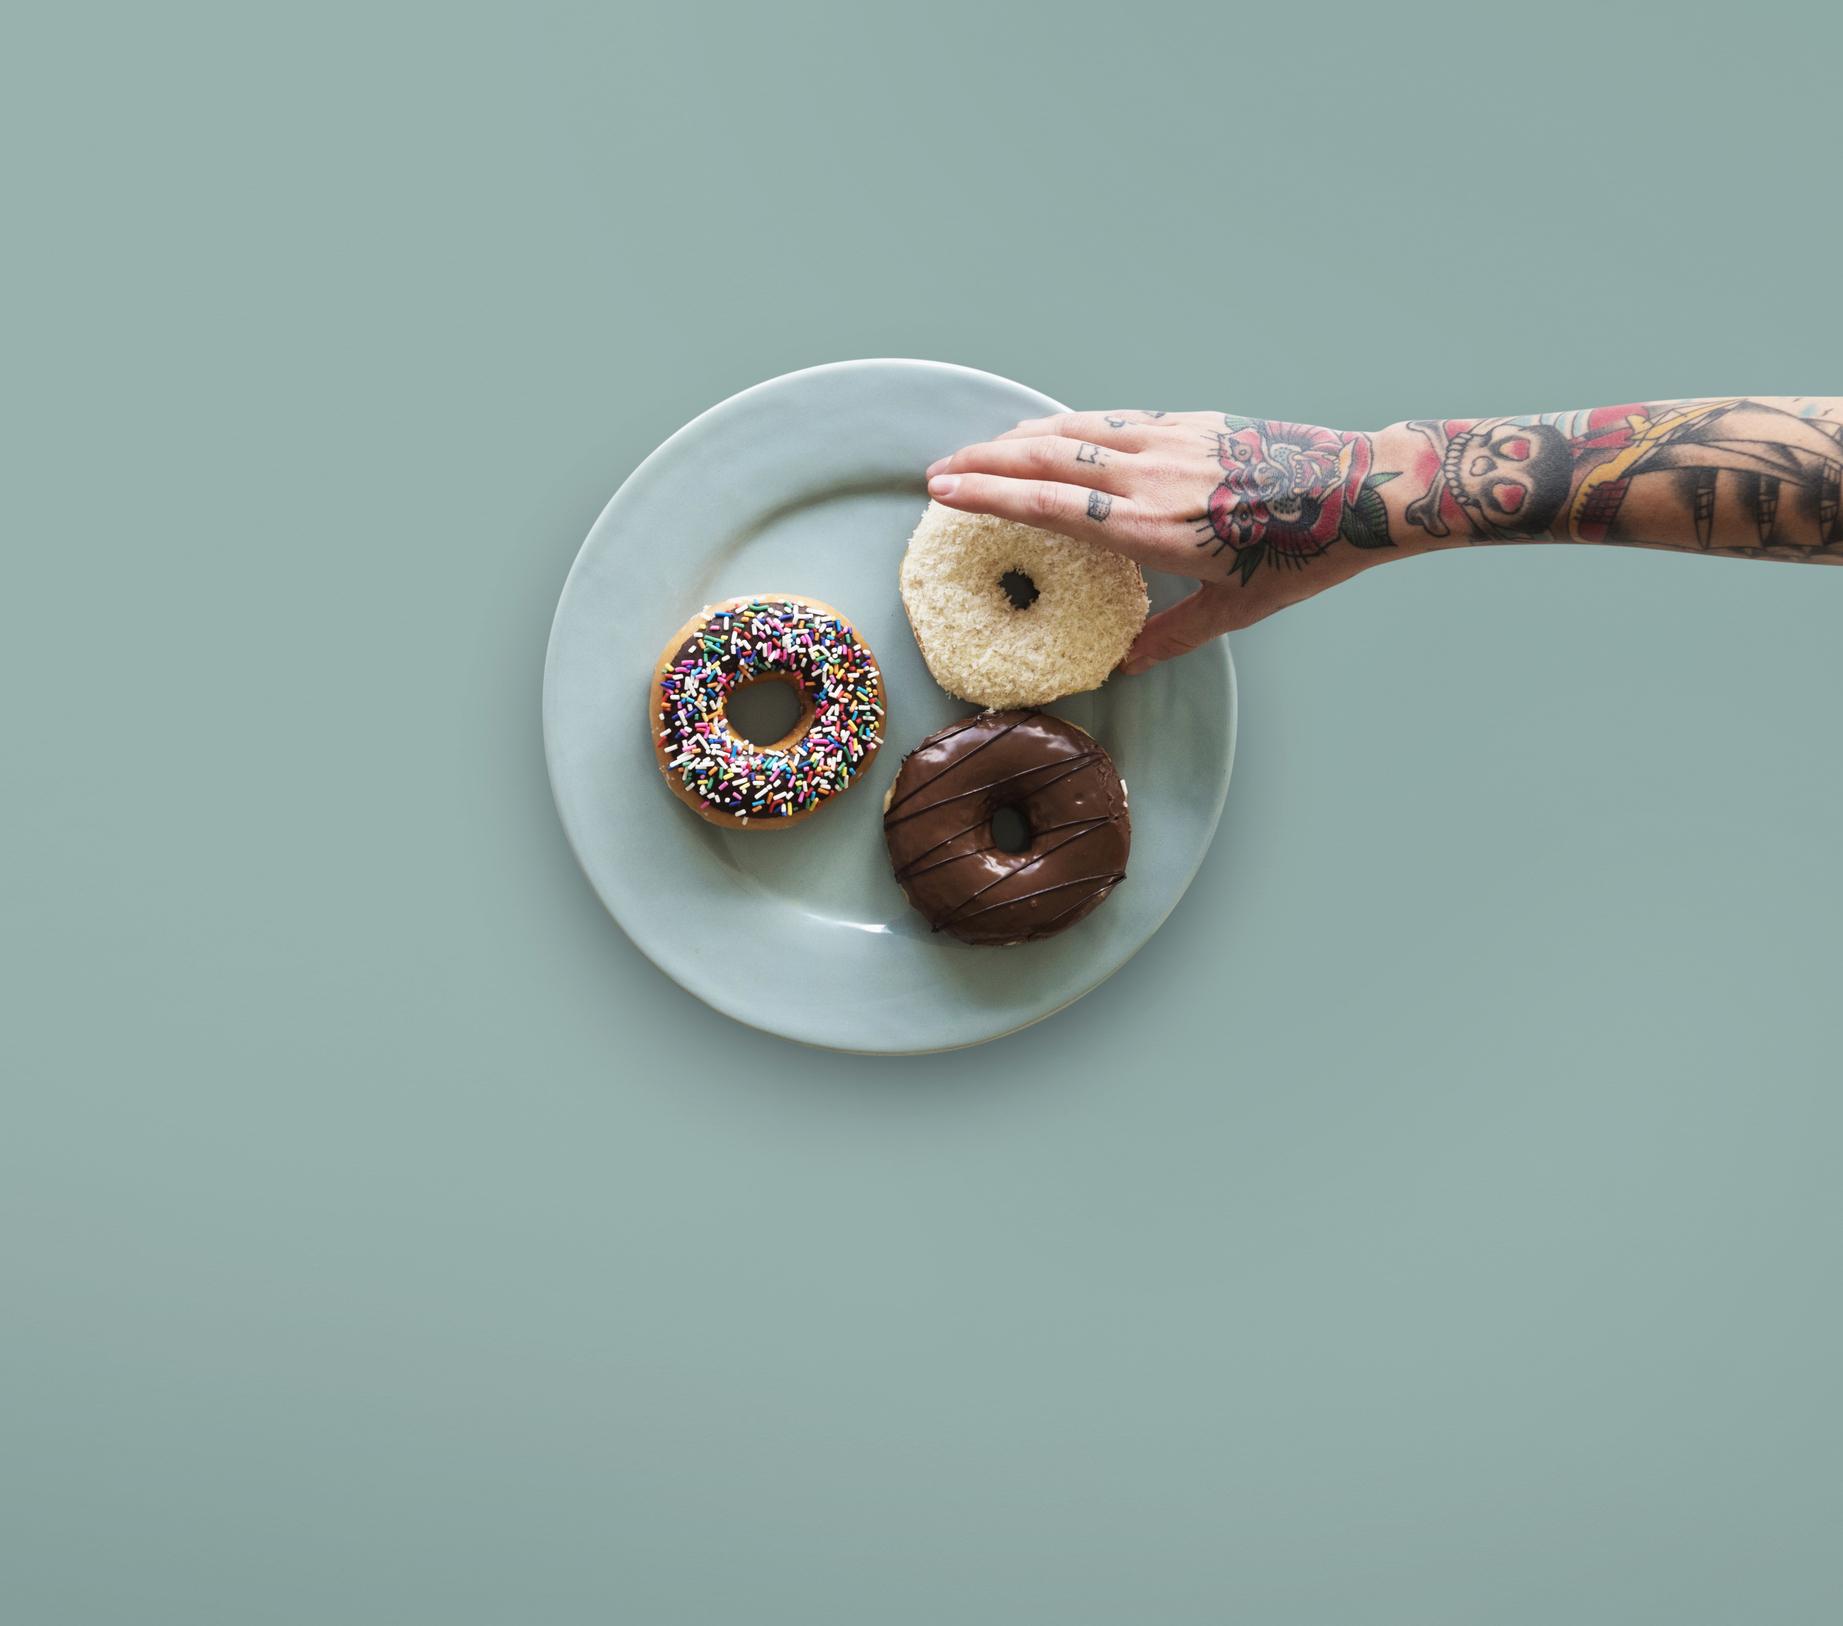 tattooed arm reaching for donut on a plate